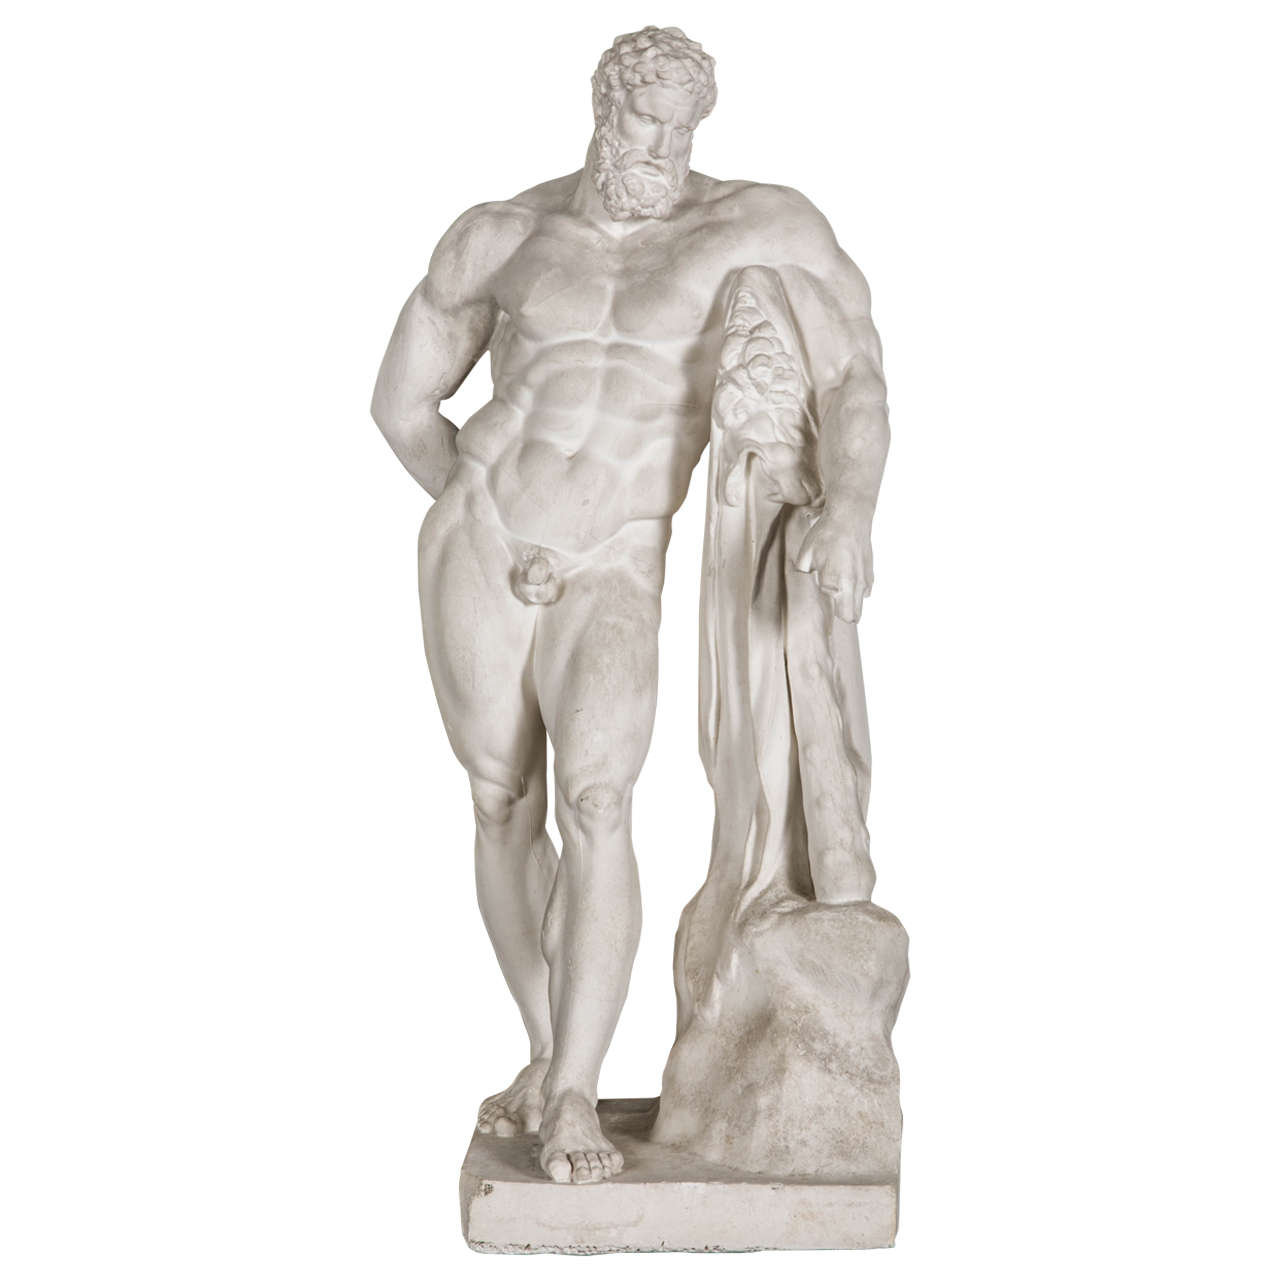 Plaster Reproduction of the Farnese Hercules